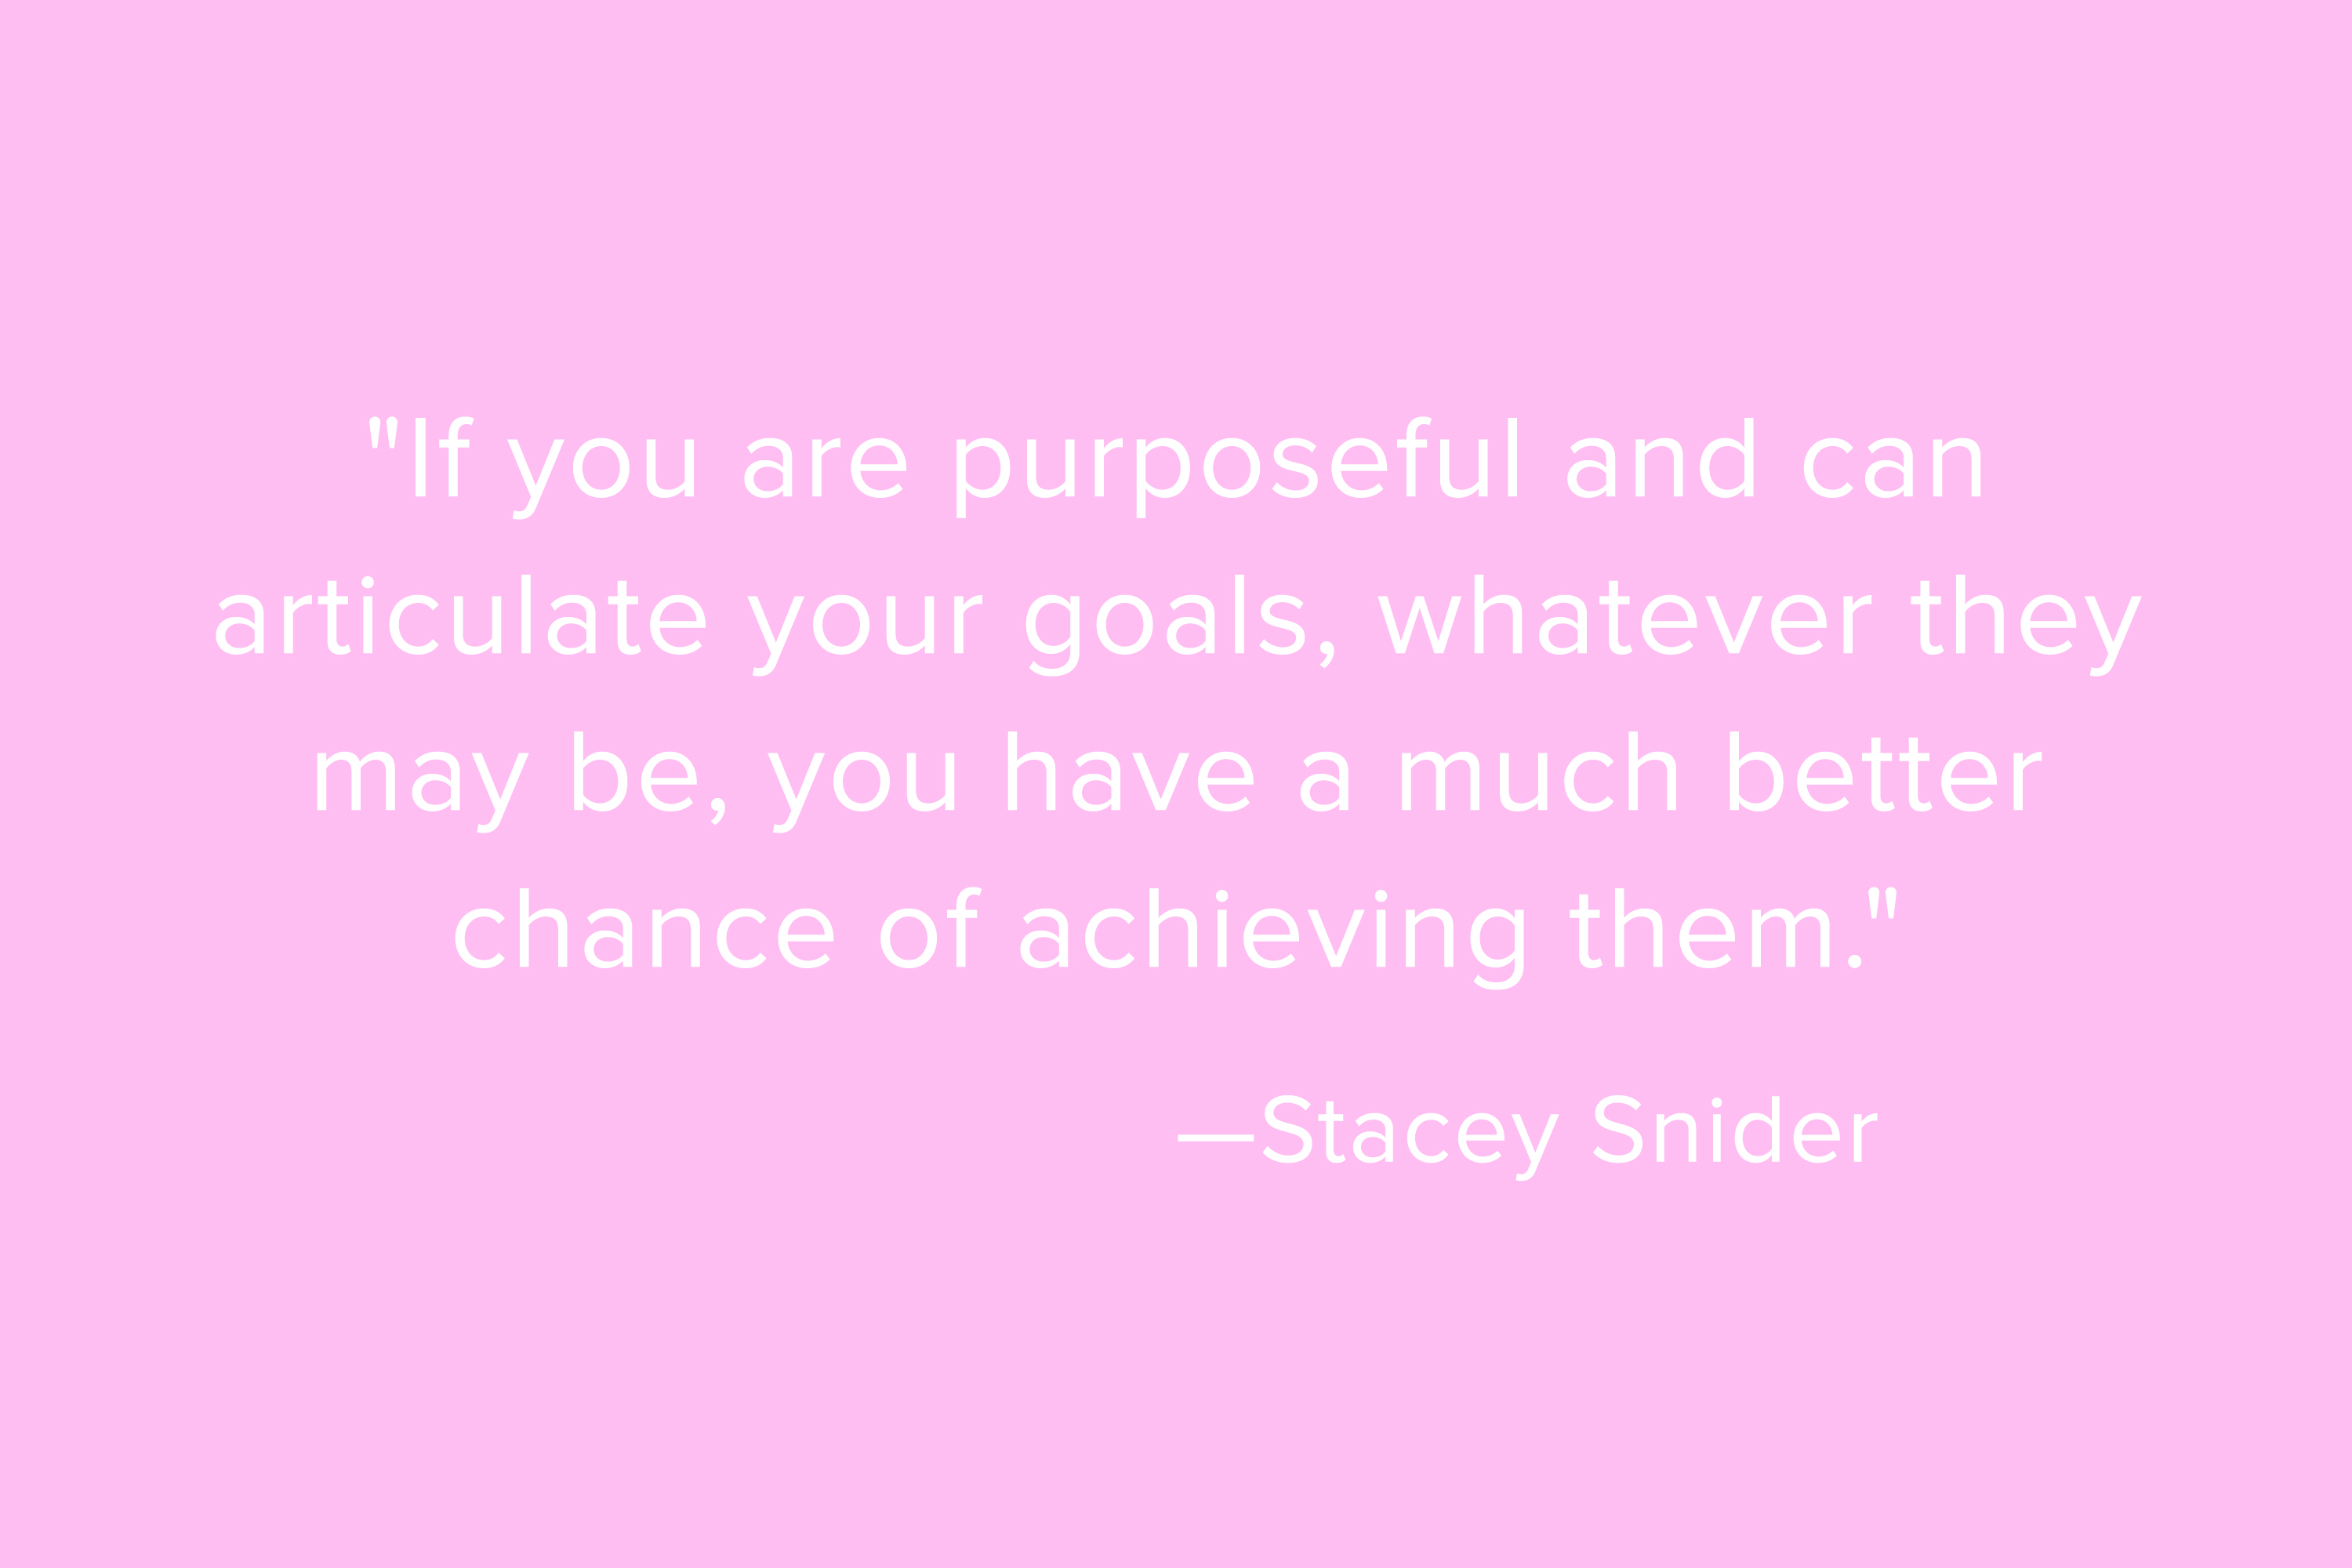 Stacey-Snider-quote-card